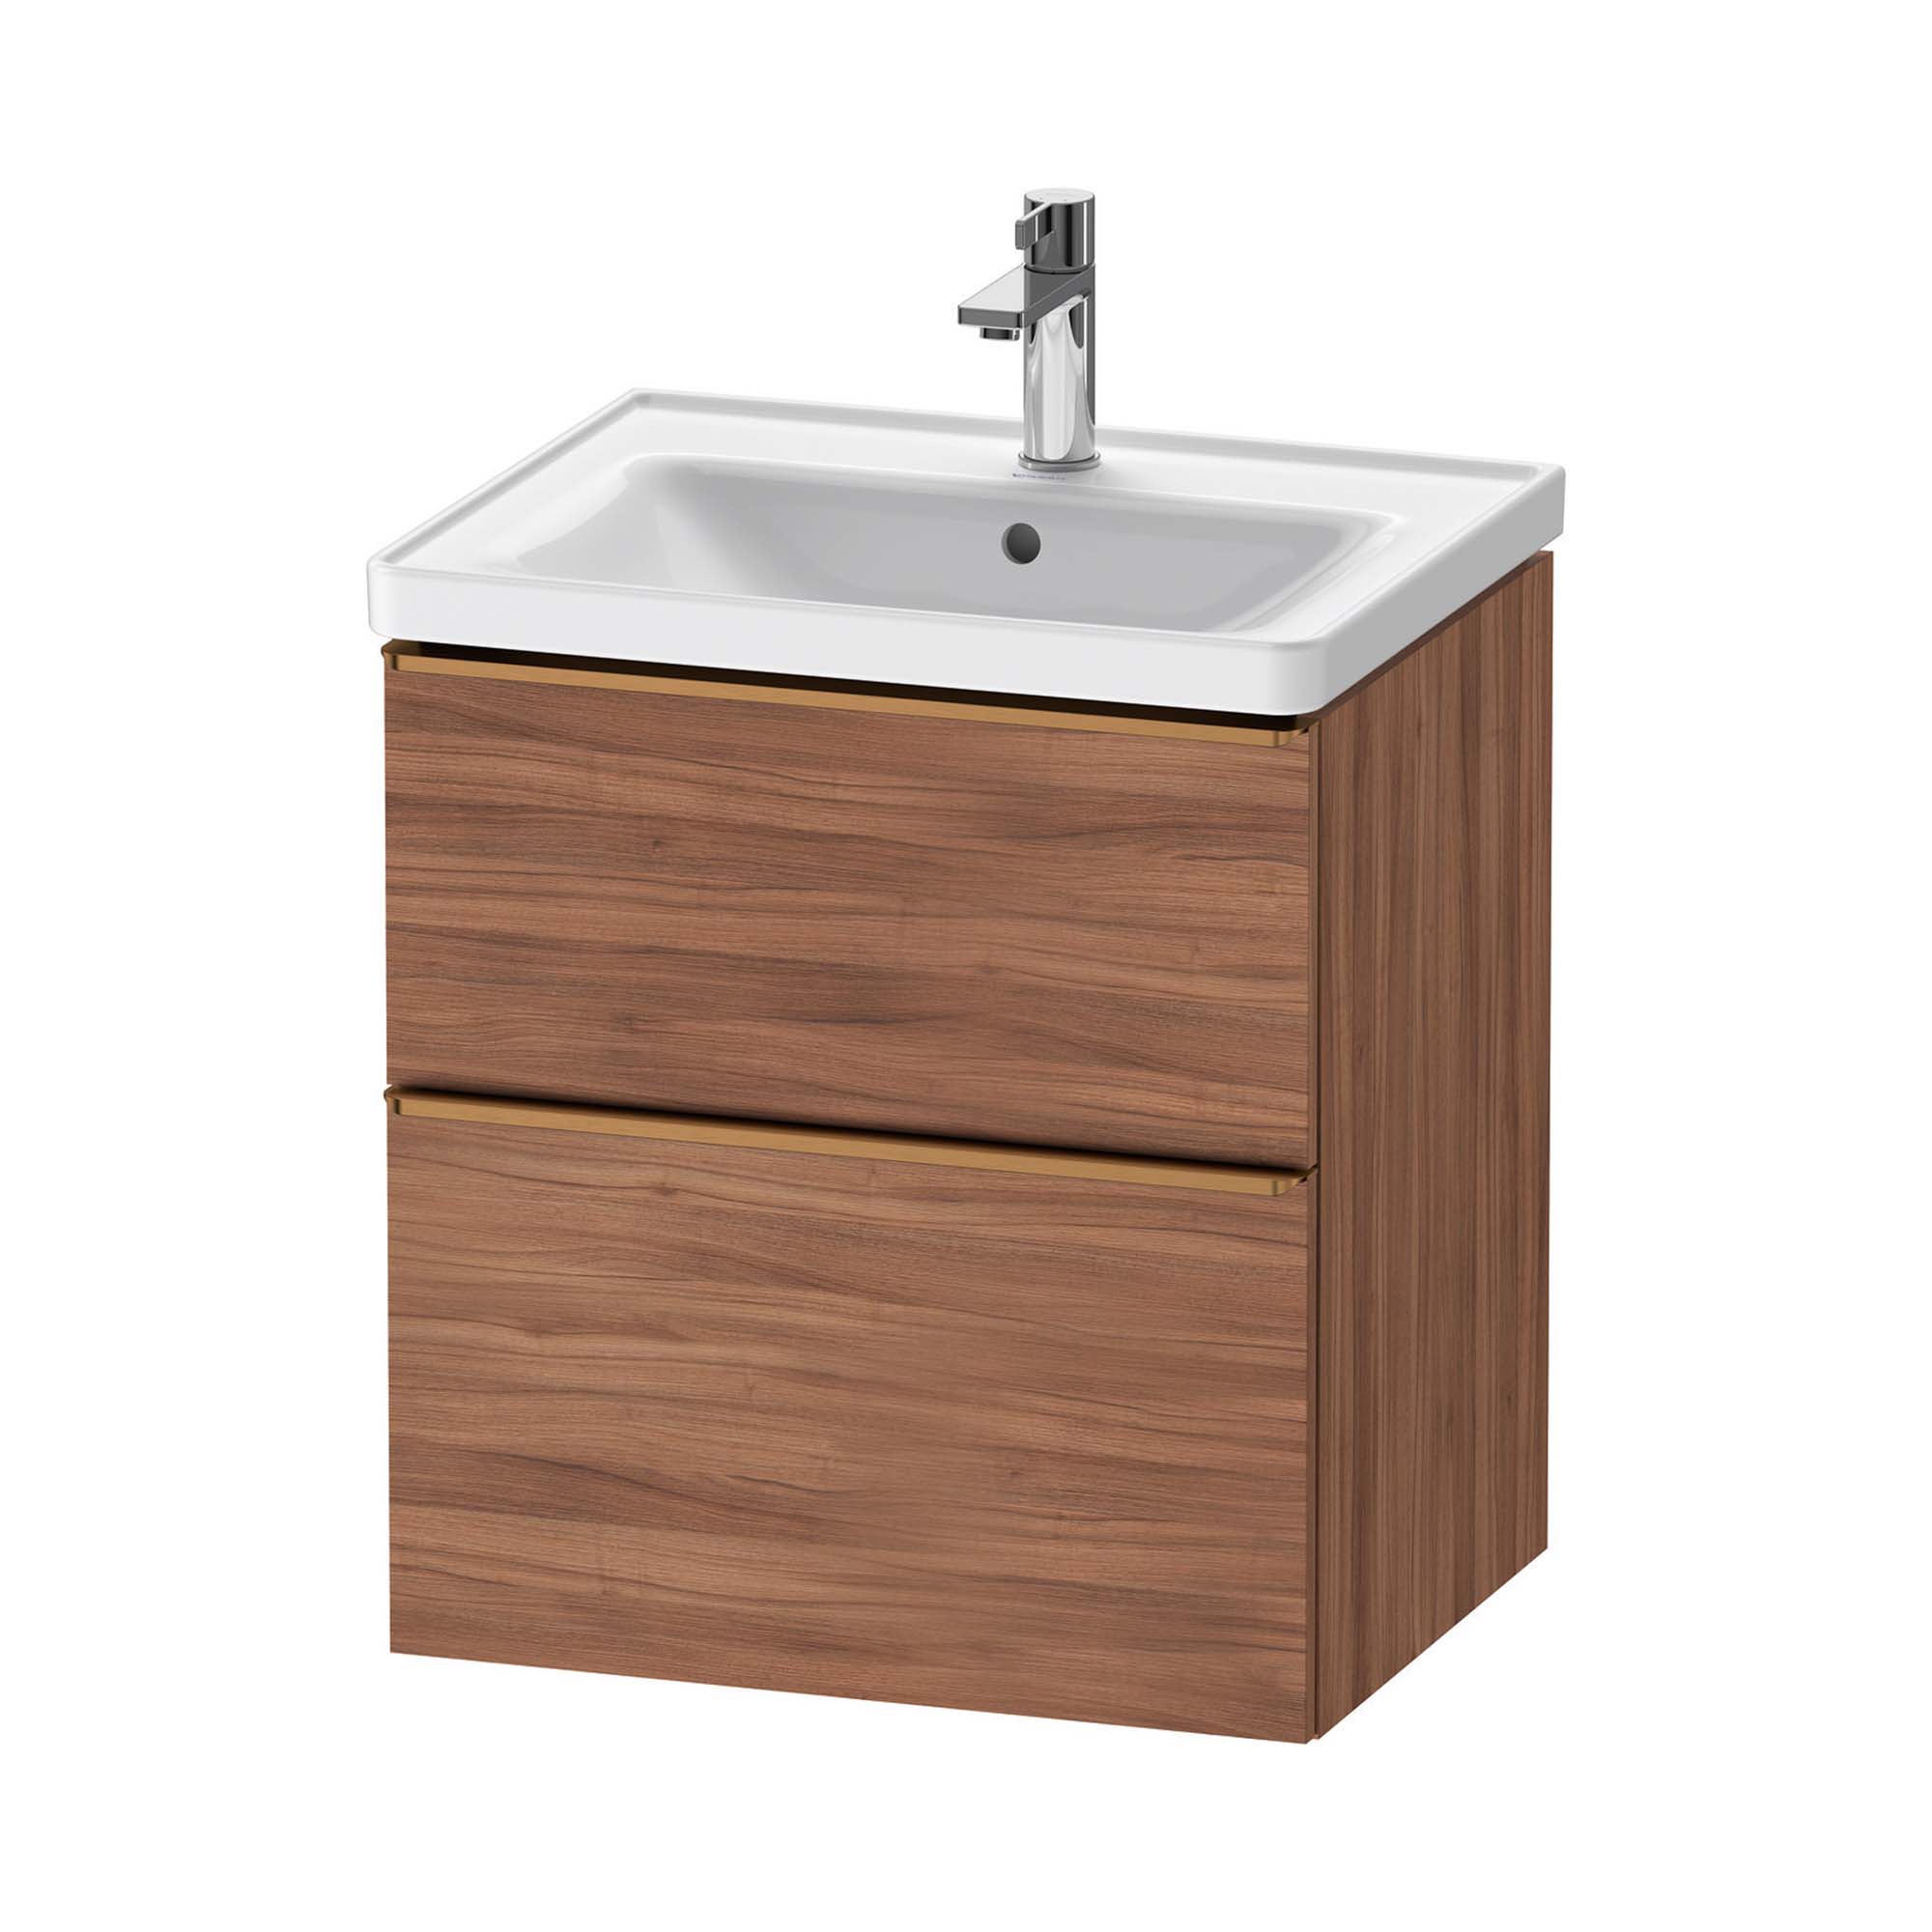 duravit d-neo 600 wall mounted vanity unit with d-neo basin walnut brushed bronze handles